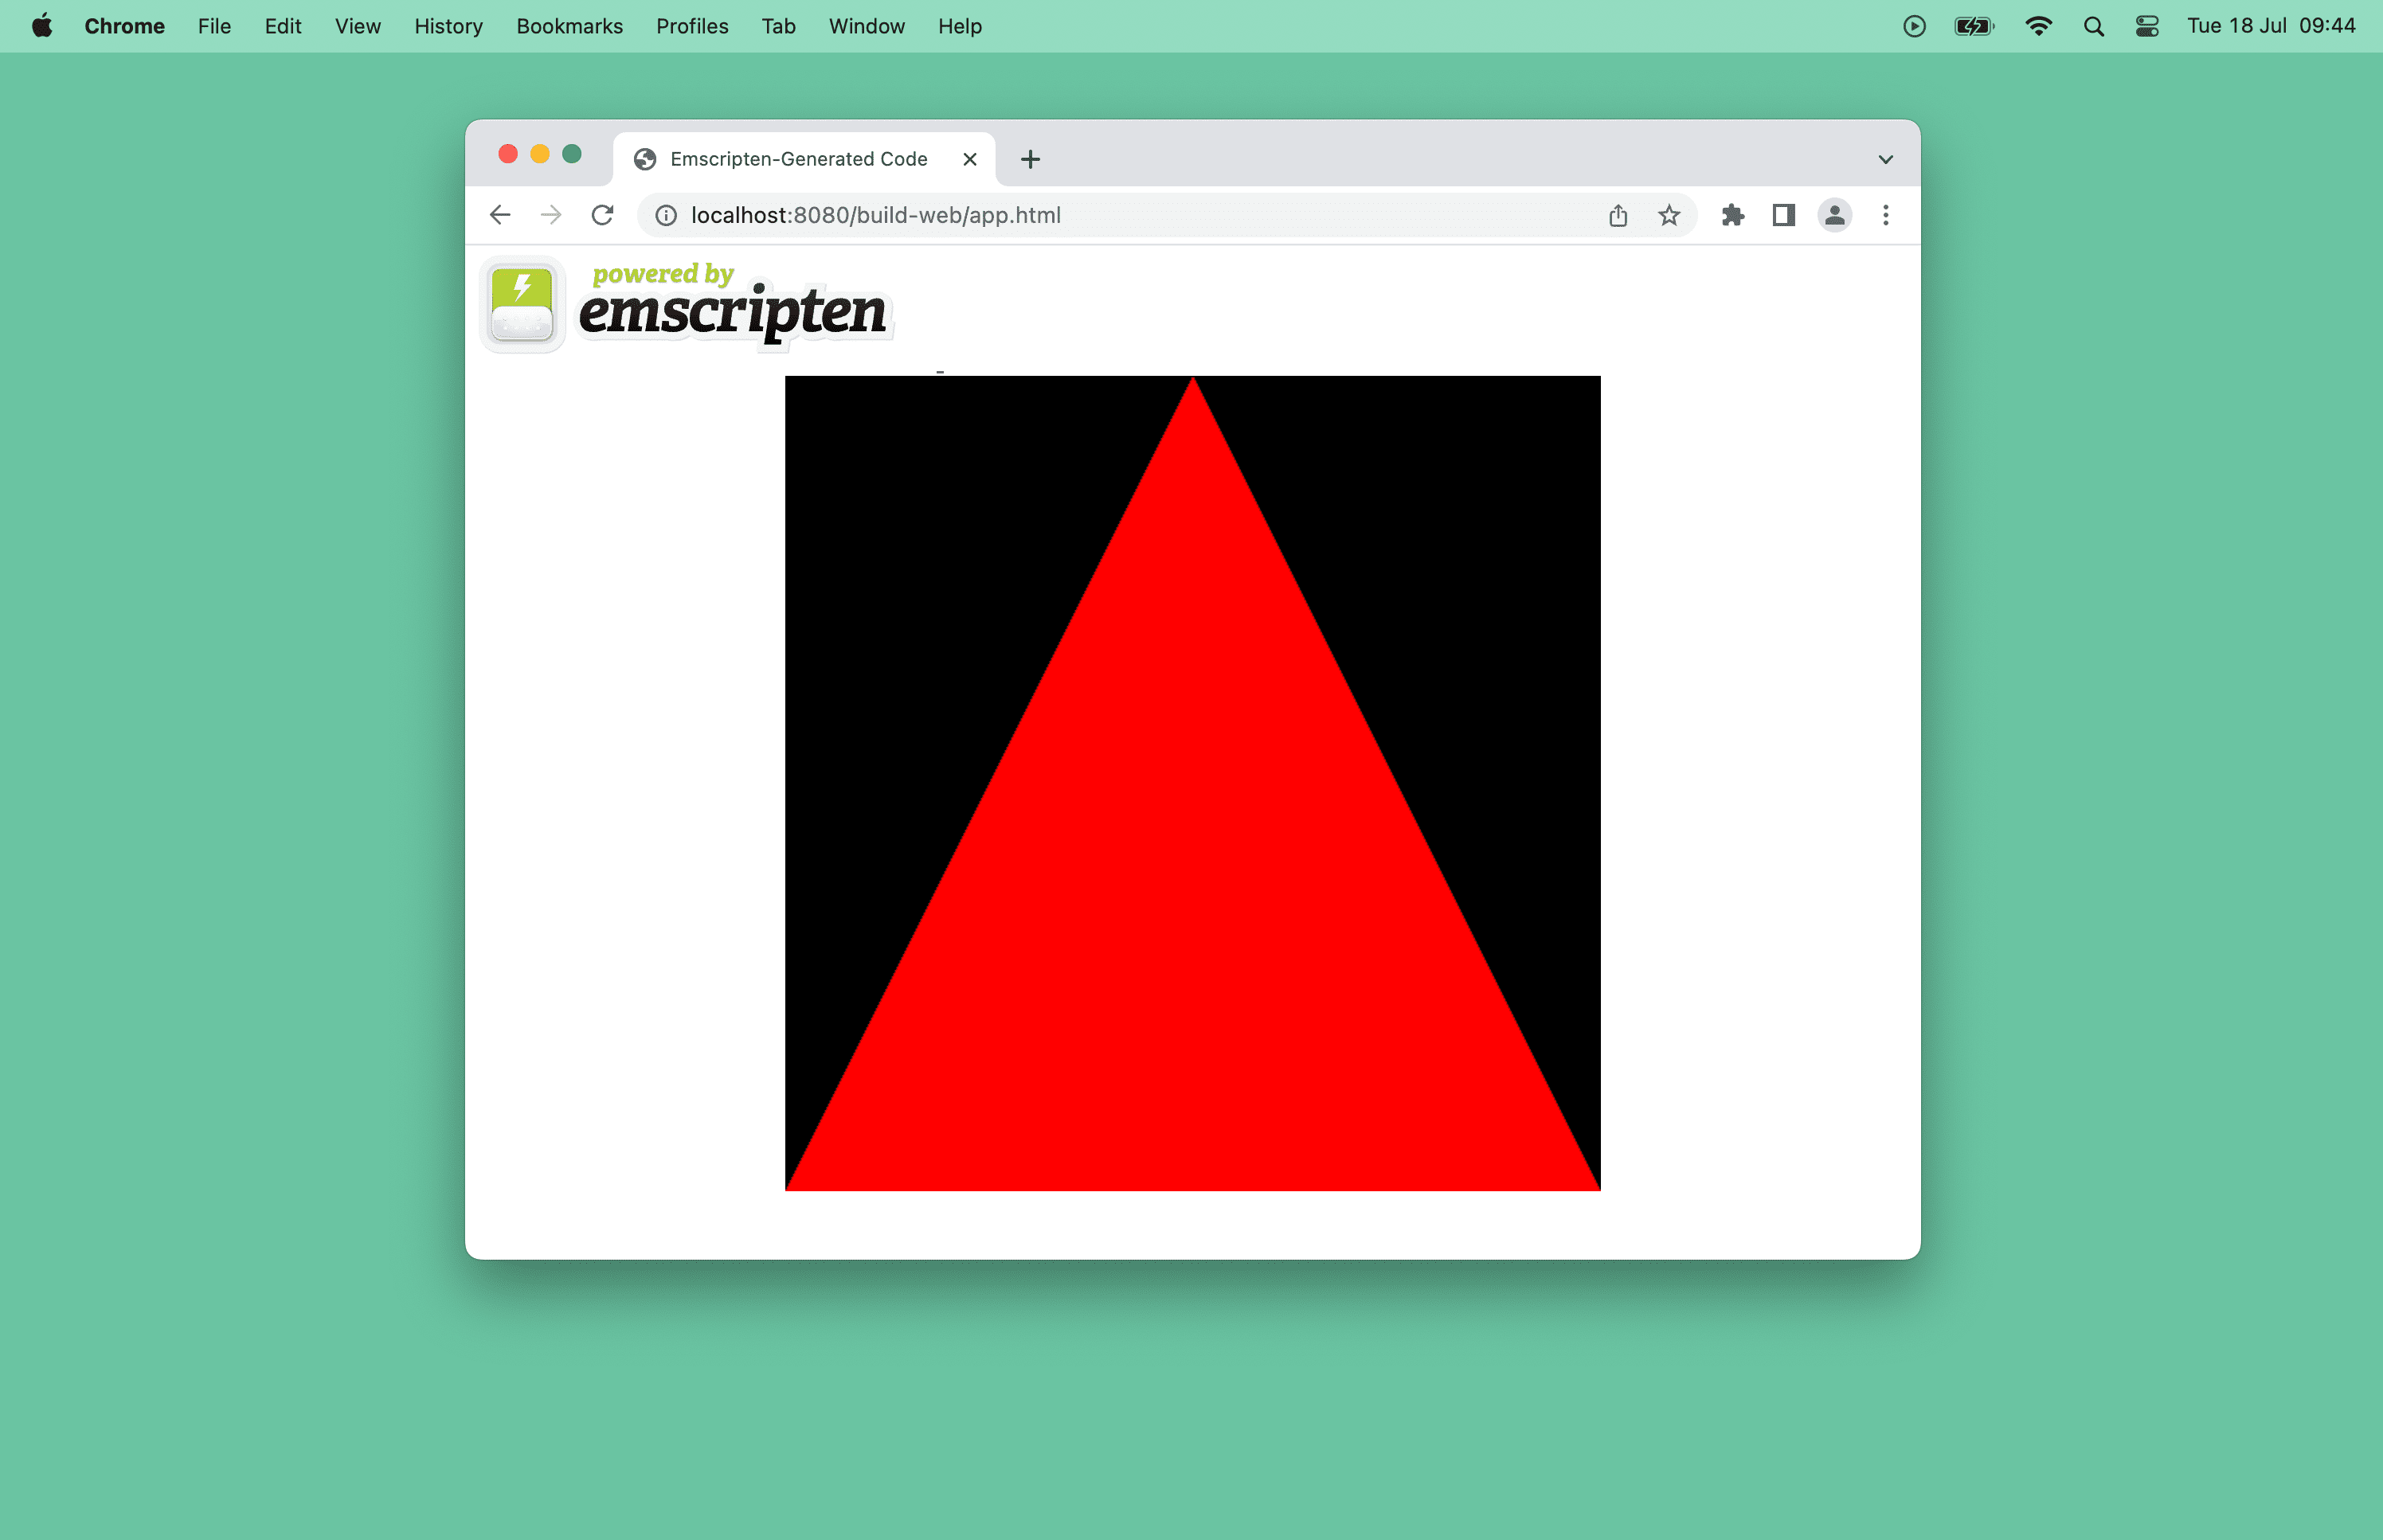 Screenshot of a red triangle in a browser window.